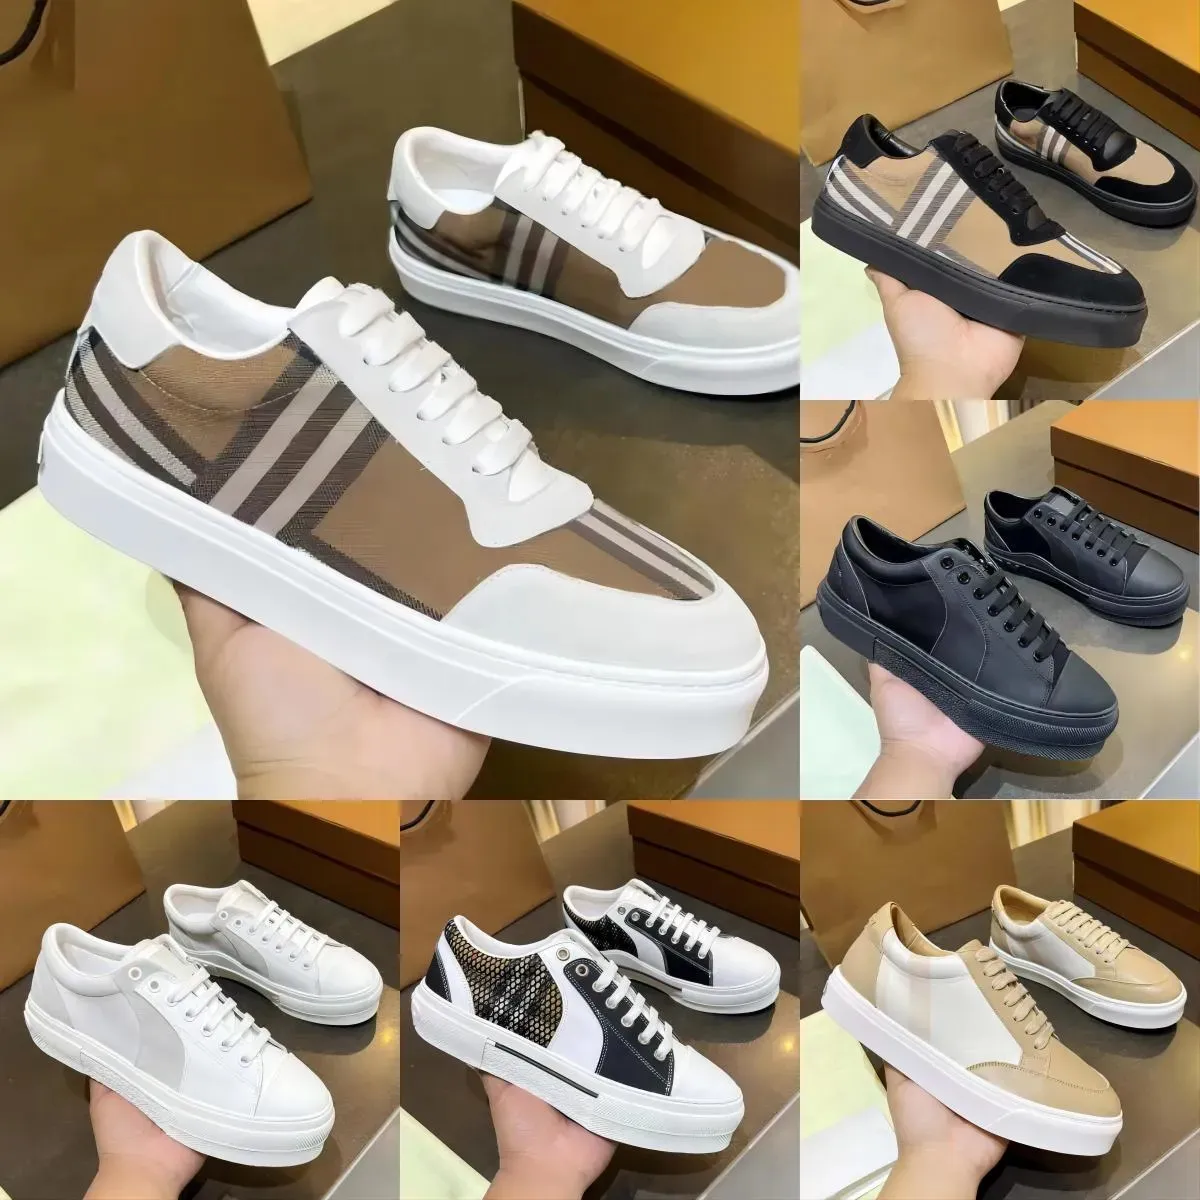 Designer Vintage Sneakers Check Shoes Lattice Men Casual Shoes Calfskin Embossed Leather Canvas Shoes Patched Nylon Trainers Platform Sneaker With Box